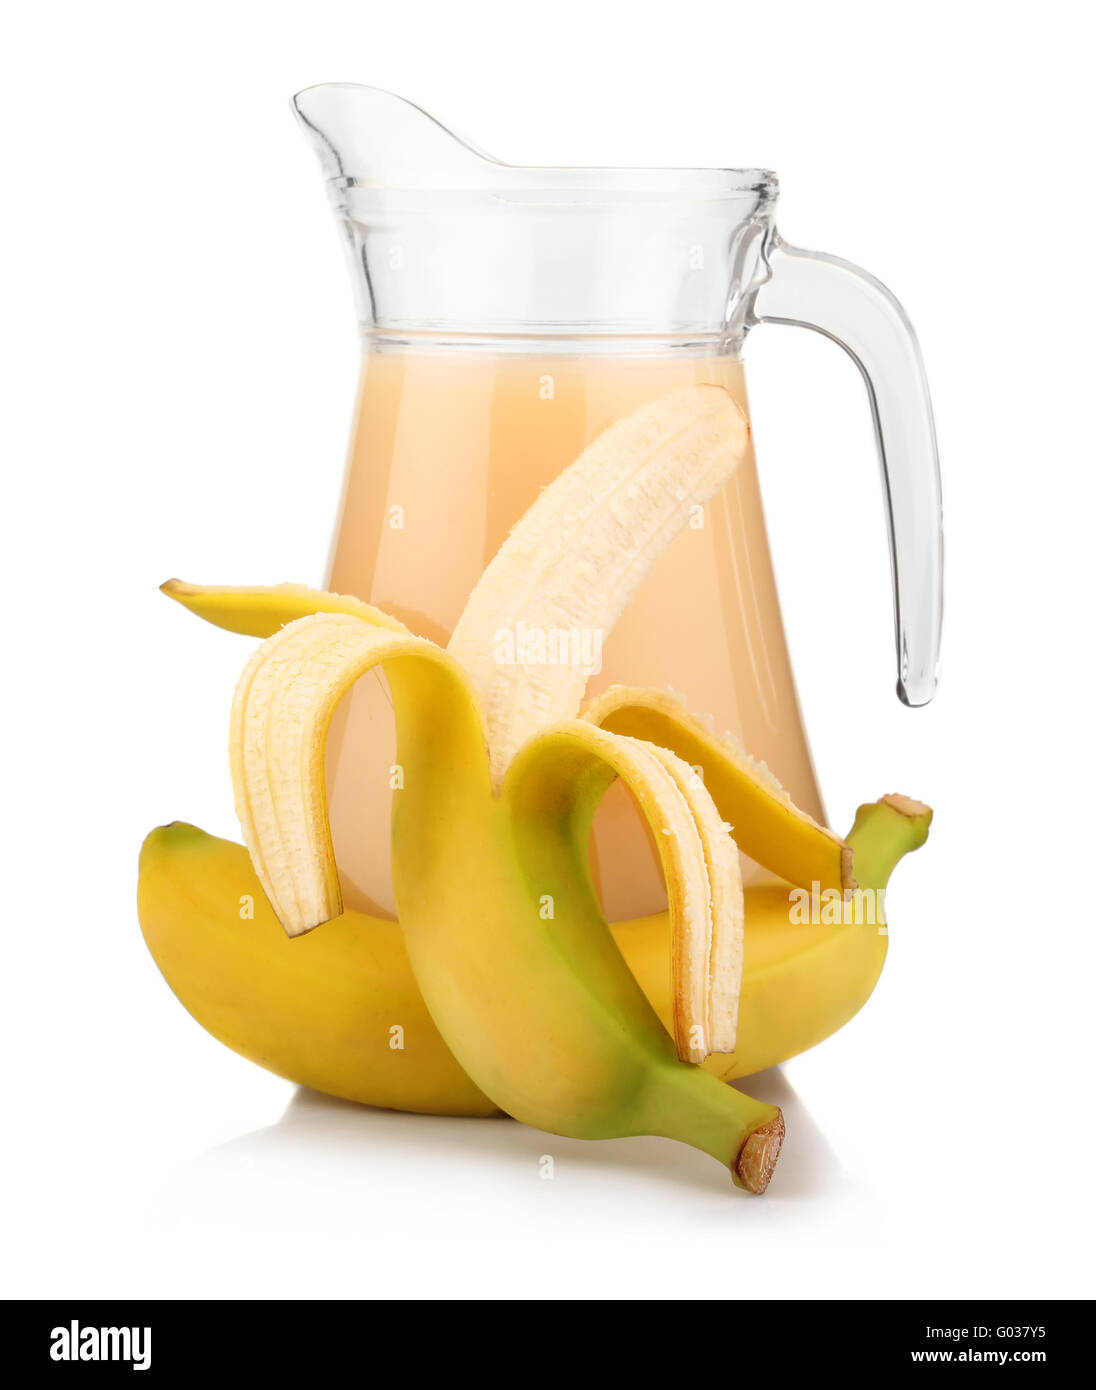 https://c8.alamy.com/comp/G037Y5/full-jug-of-banana-juice-and-fruits-isolated-on-white-G037Y5.jpg